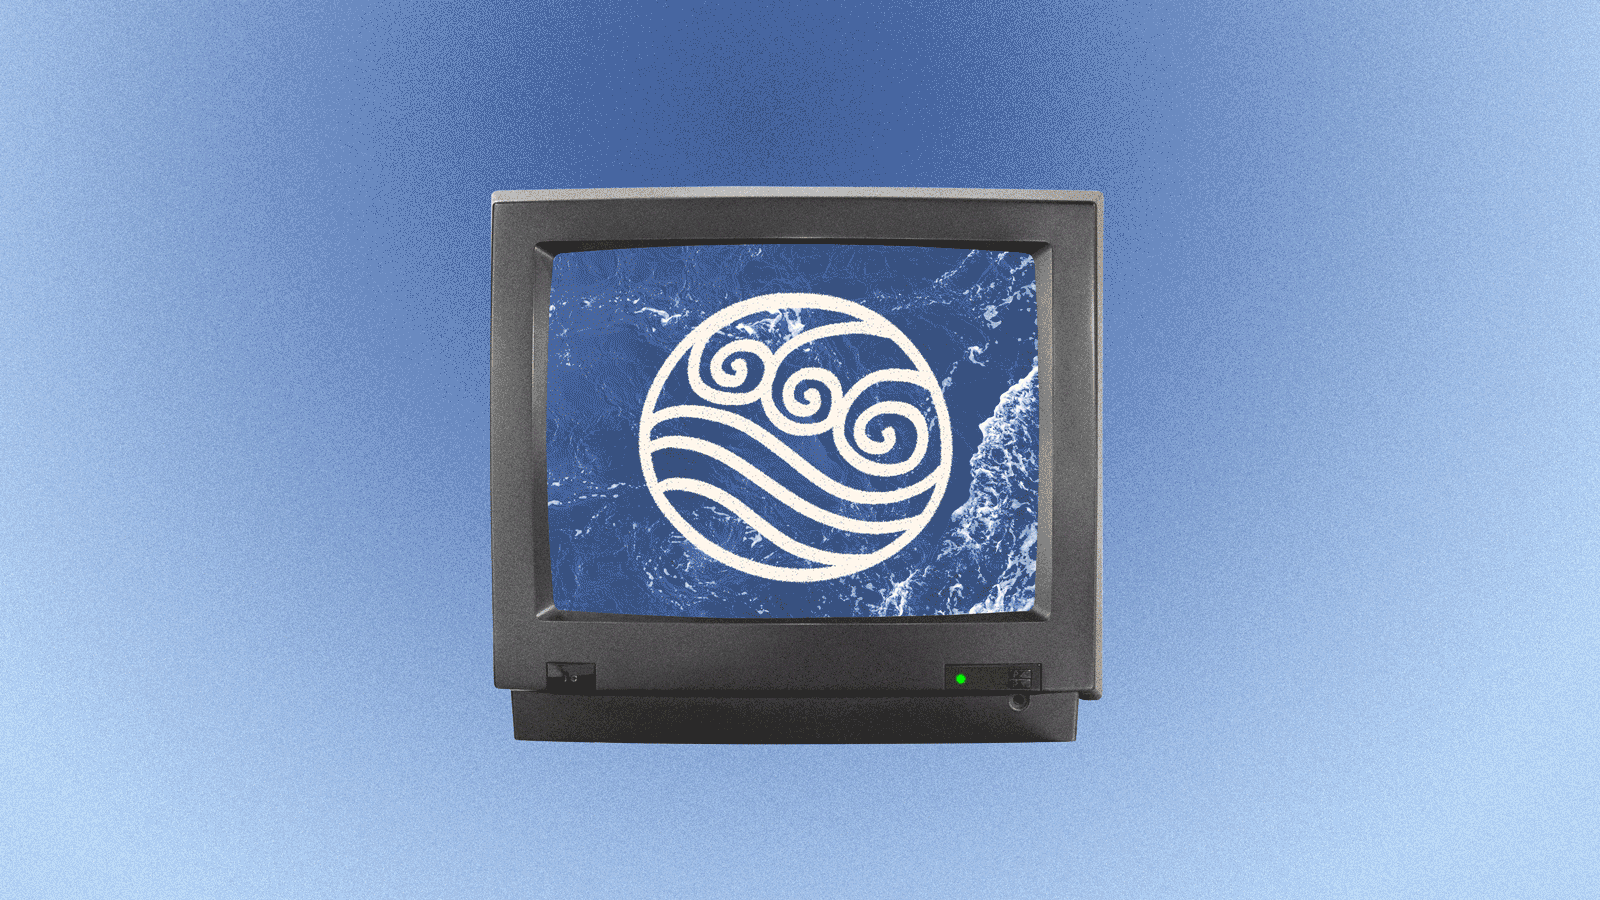 TV flashing between water, earth, fire, and air element symbols